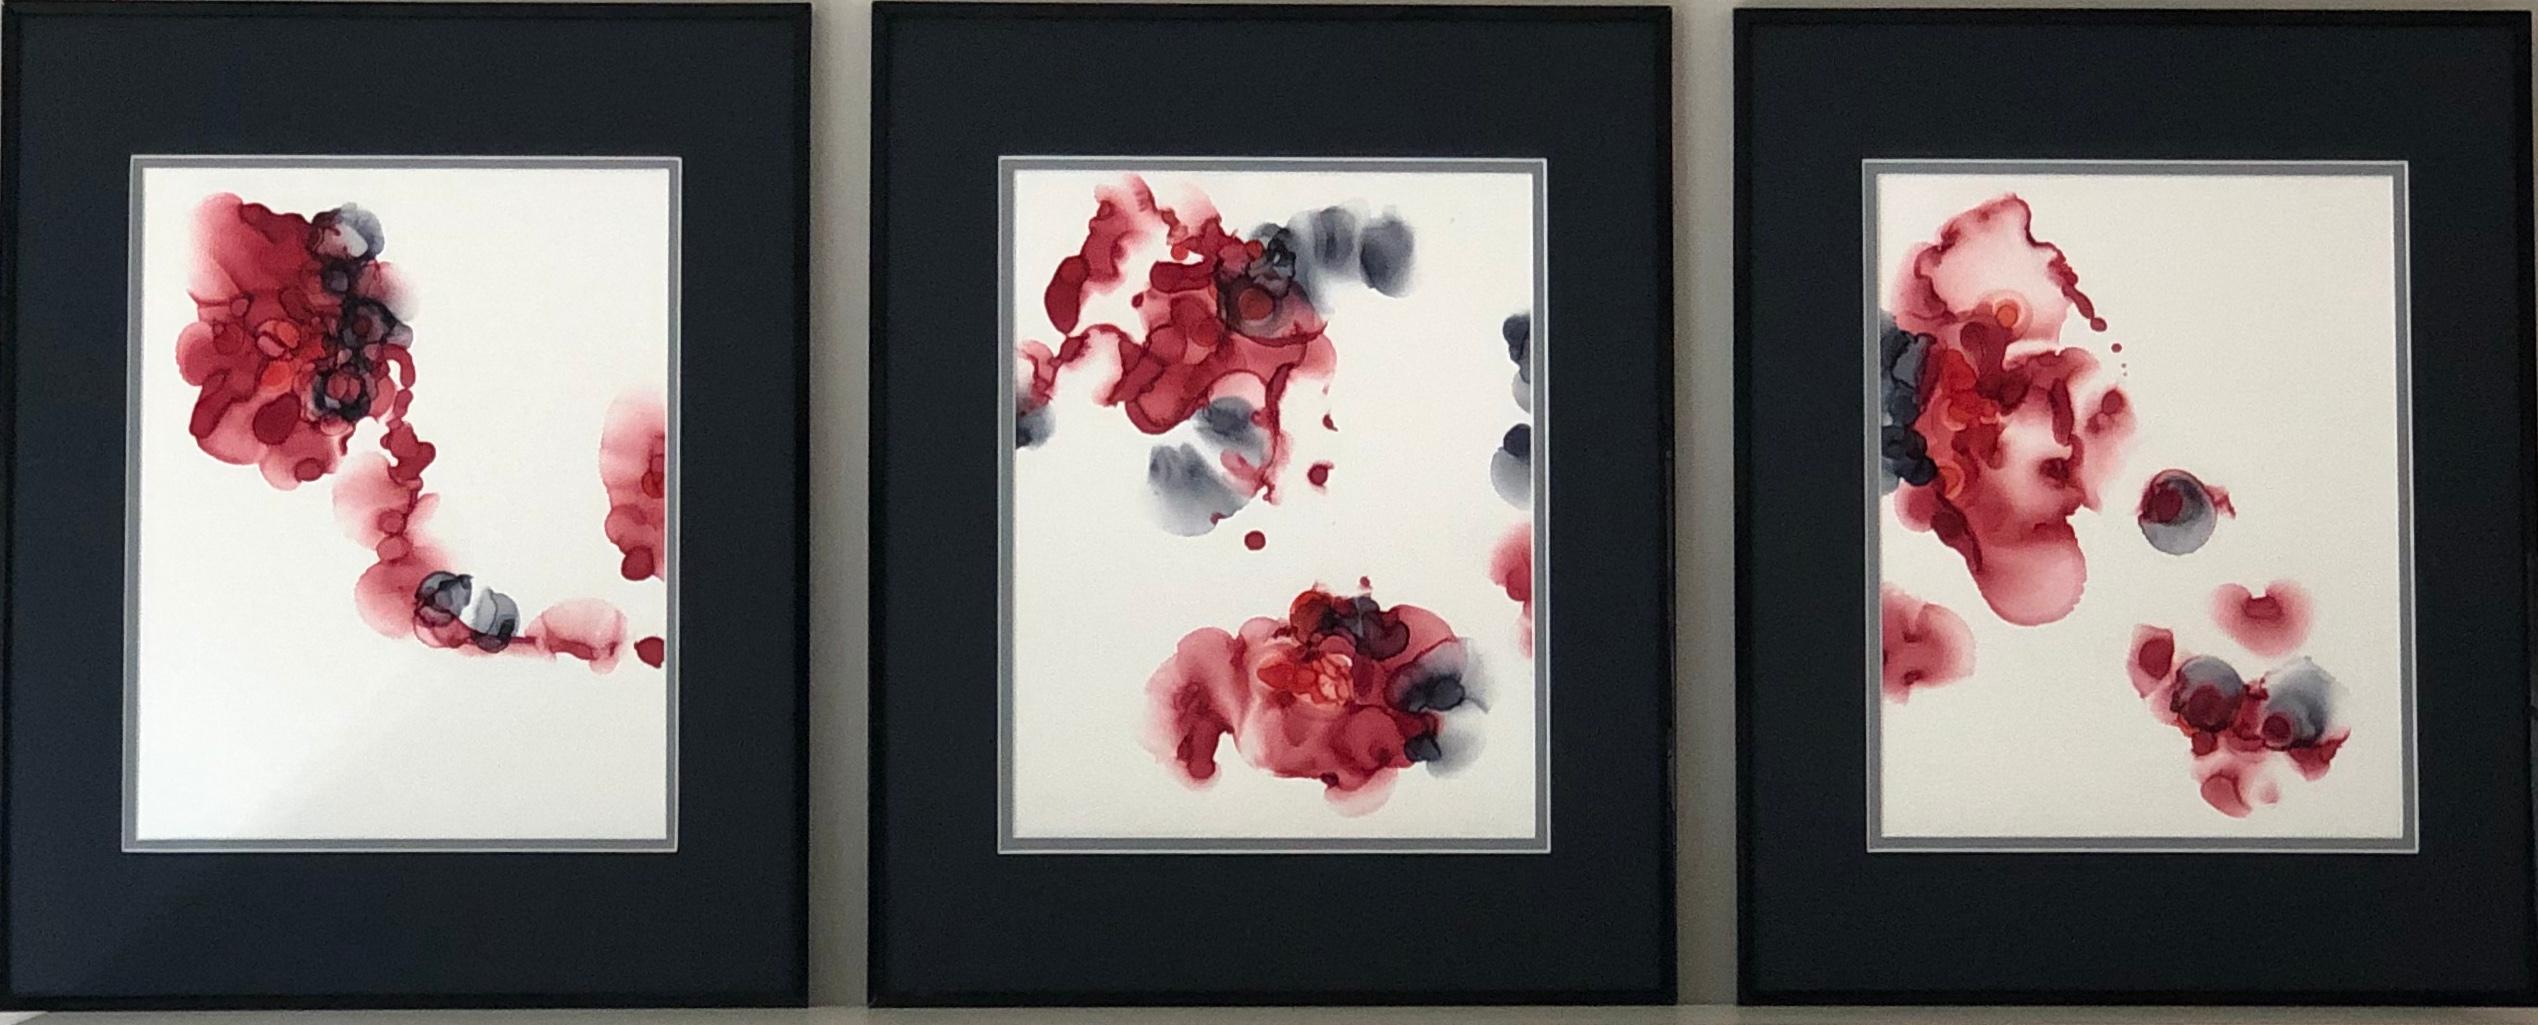 Singed roses - abstraction art, made in cherry red, garnet red, white, grey